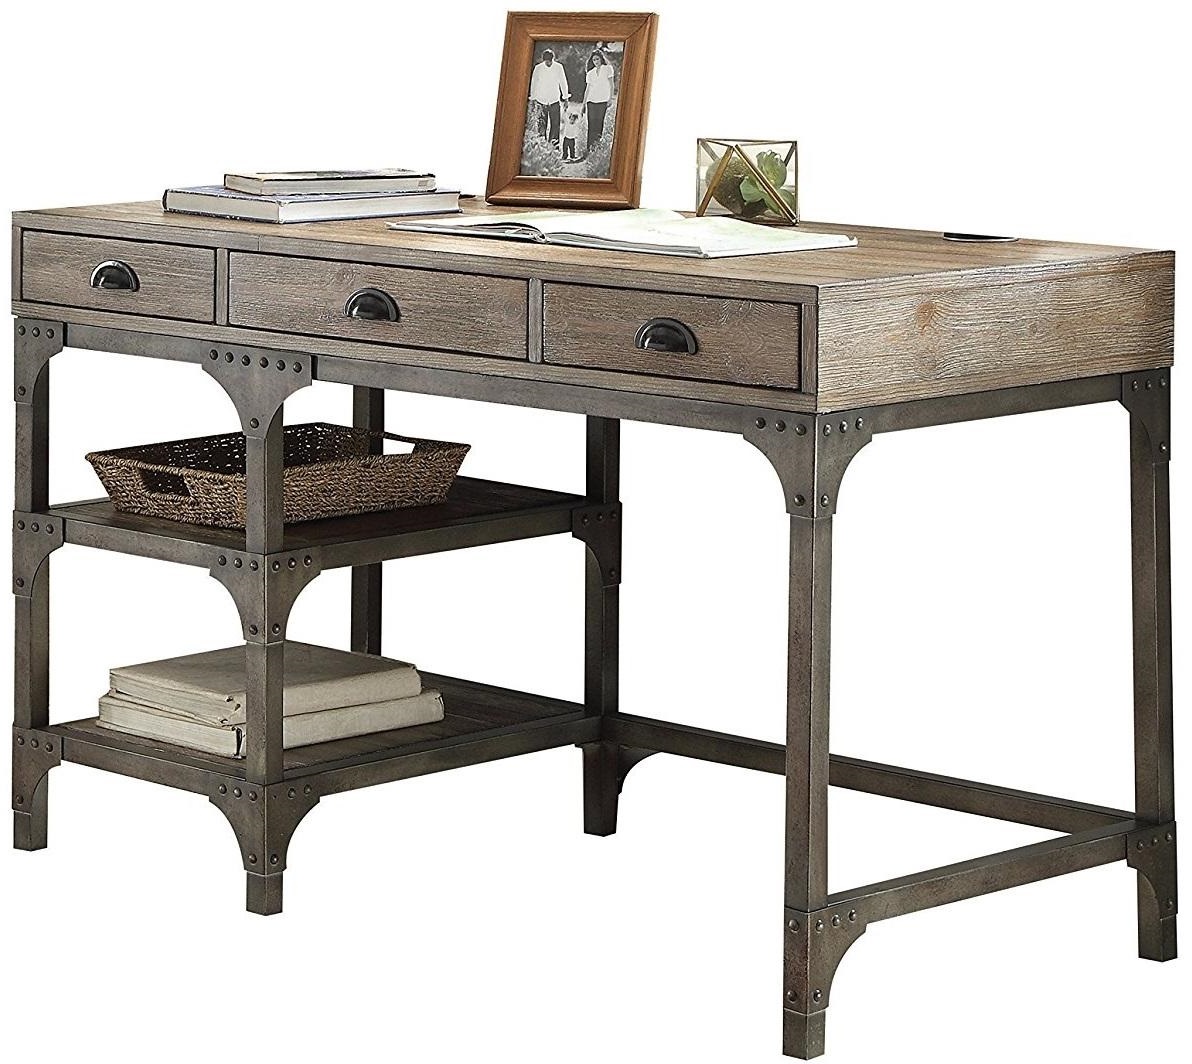 47" X 24" X 29" Weathered Oak And Antique Silver Desk